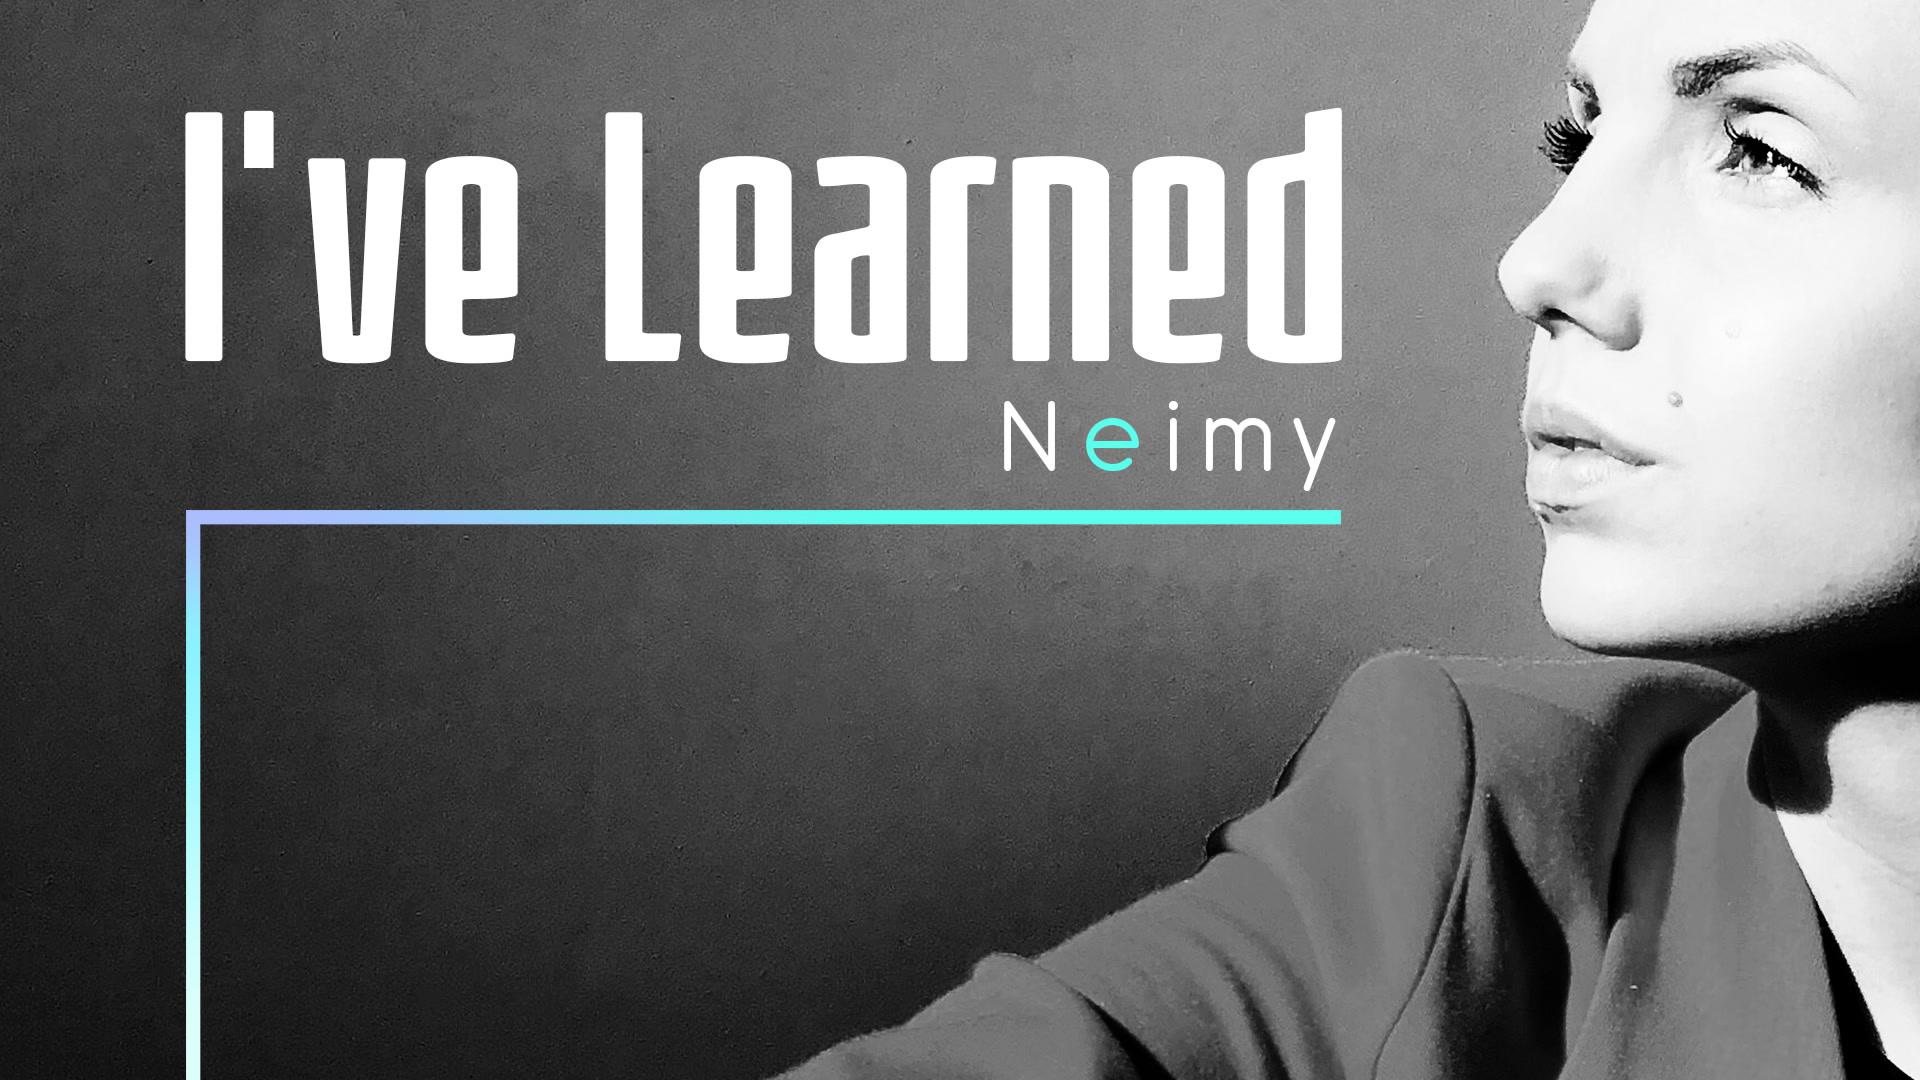 NEIMY - I've Learned (Acoustic Version)